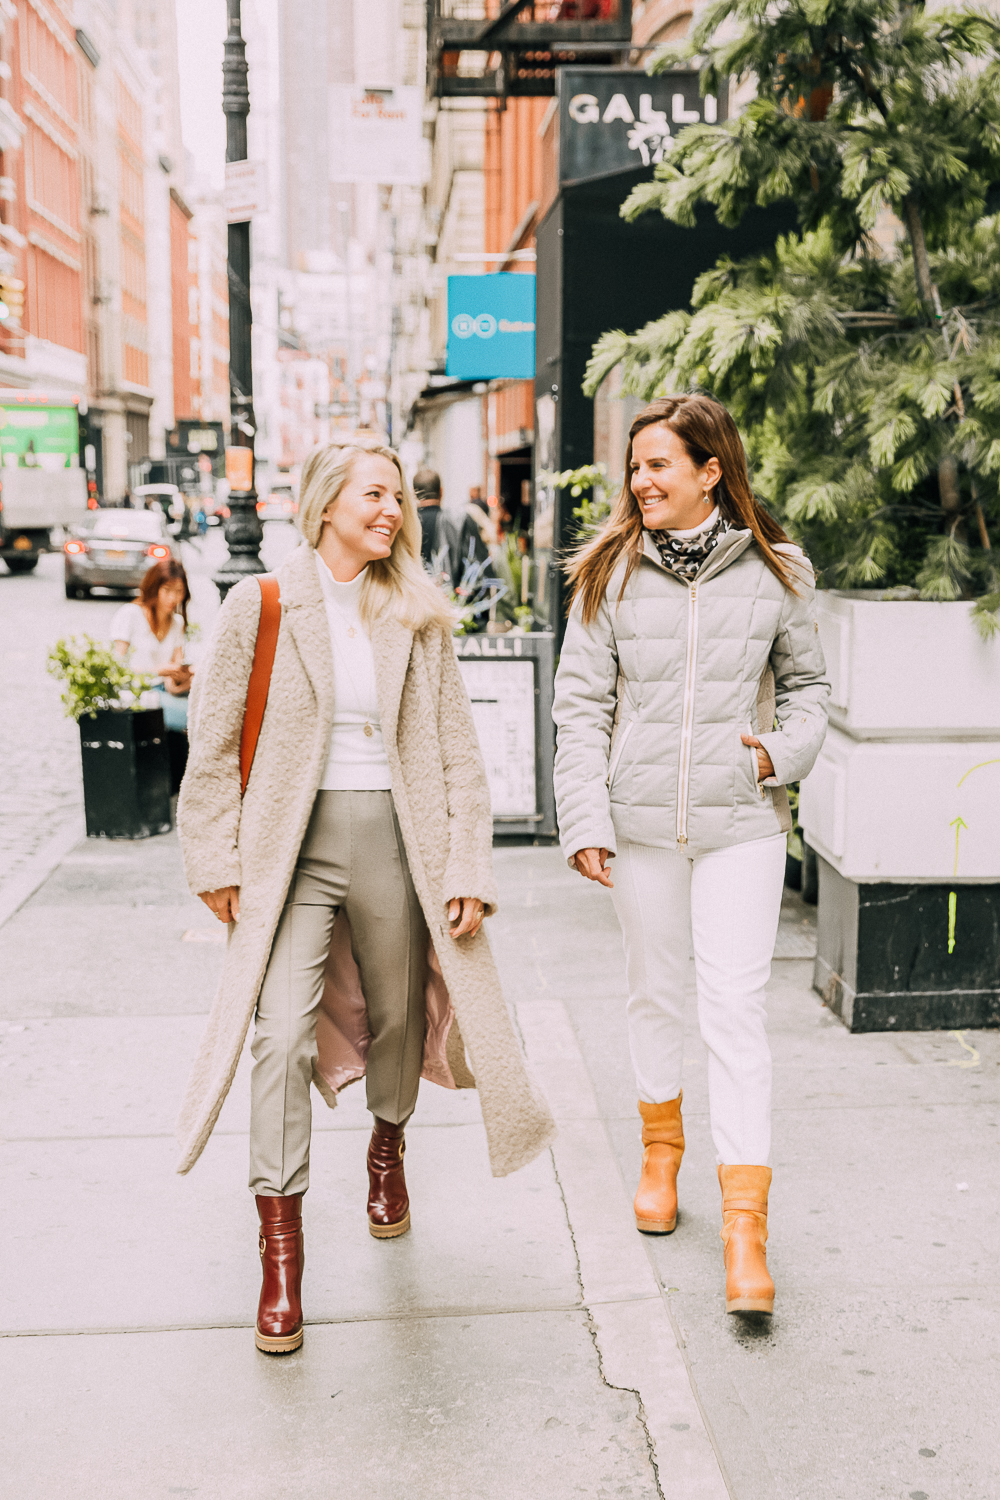 Meet Mom Boss, Nicole Feliciano from Mom Trends wearing apres ski look from Bogner fashion in soho new york city